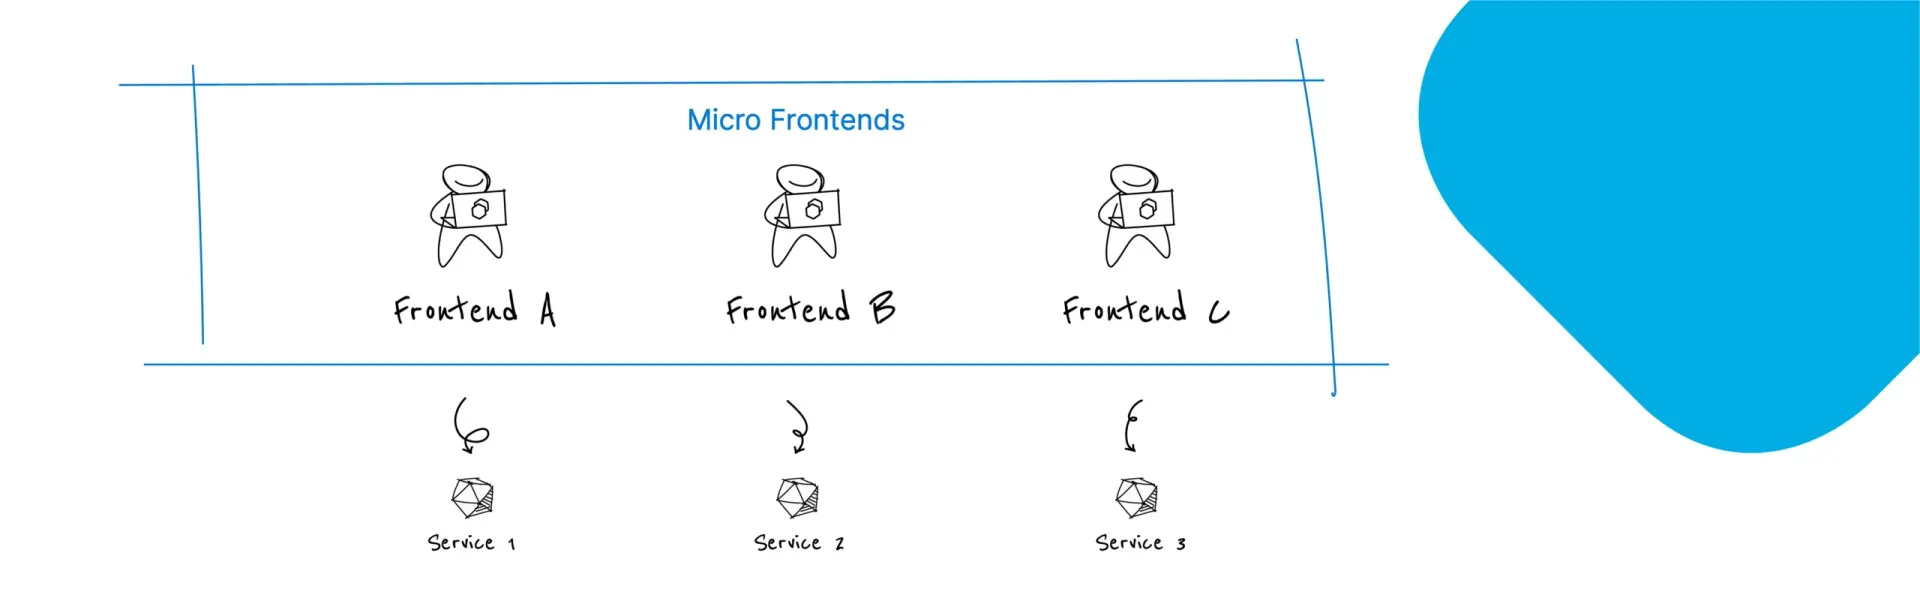 Micro Frontends